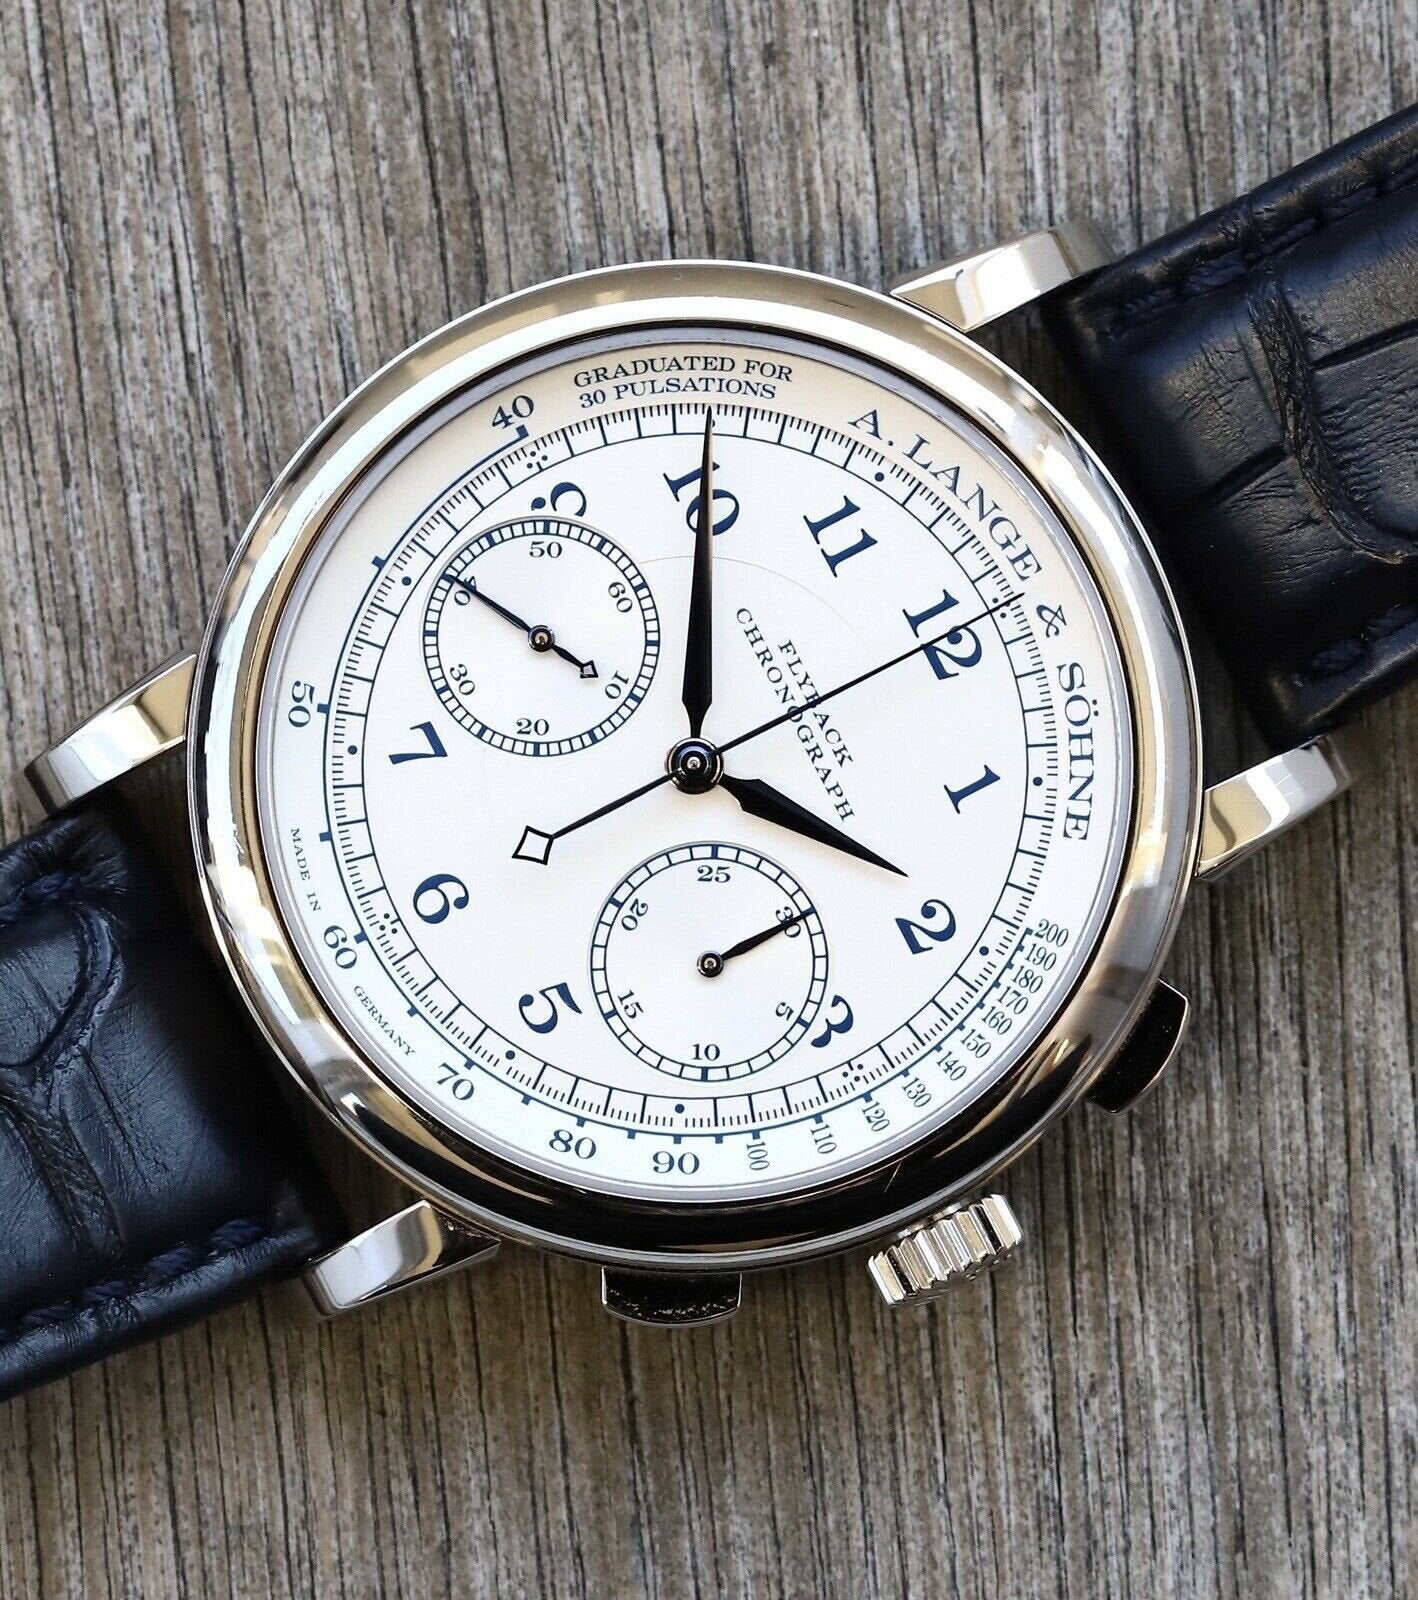 A._Lange_and_Sohne_1815_Flyback_Chrono_Boutique_Edition_414.026_18K_White_Gold_Watch_Vault_02.jpg